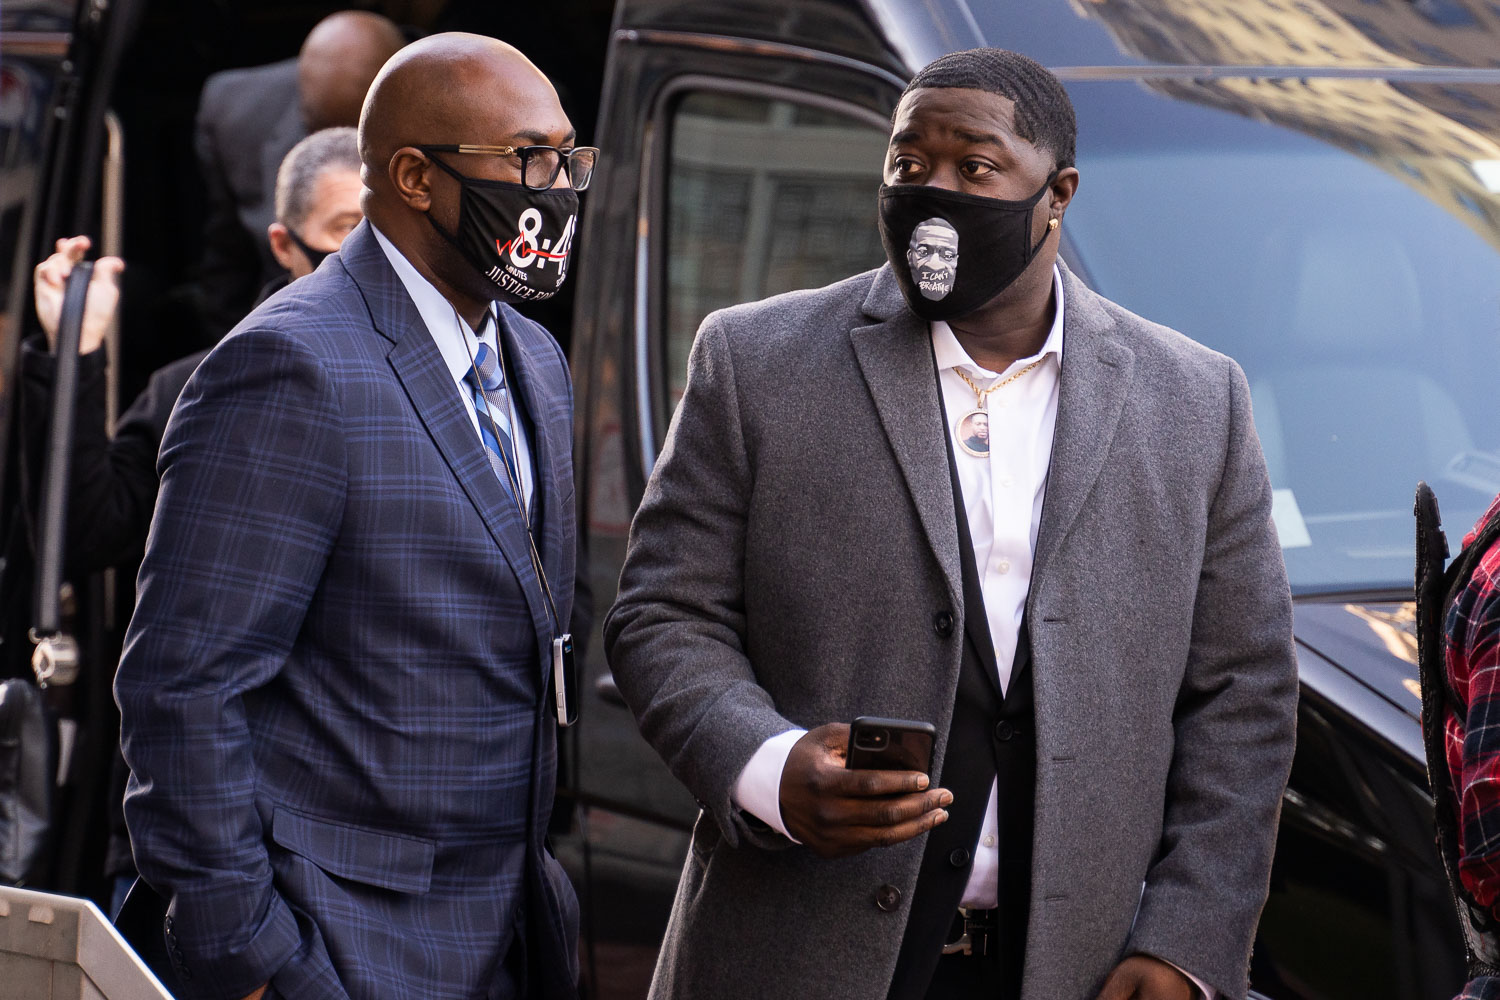 March 29, 2021 - Minneapolis -- Terrence and Philonise Floyd arrive to a press conference outside the Hennepin County Government Center where opening statements in the Derek Chauvin murder trial are set to begin.